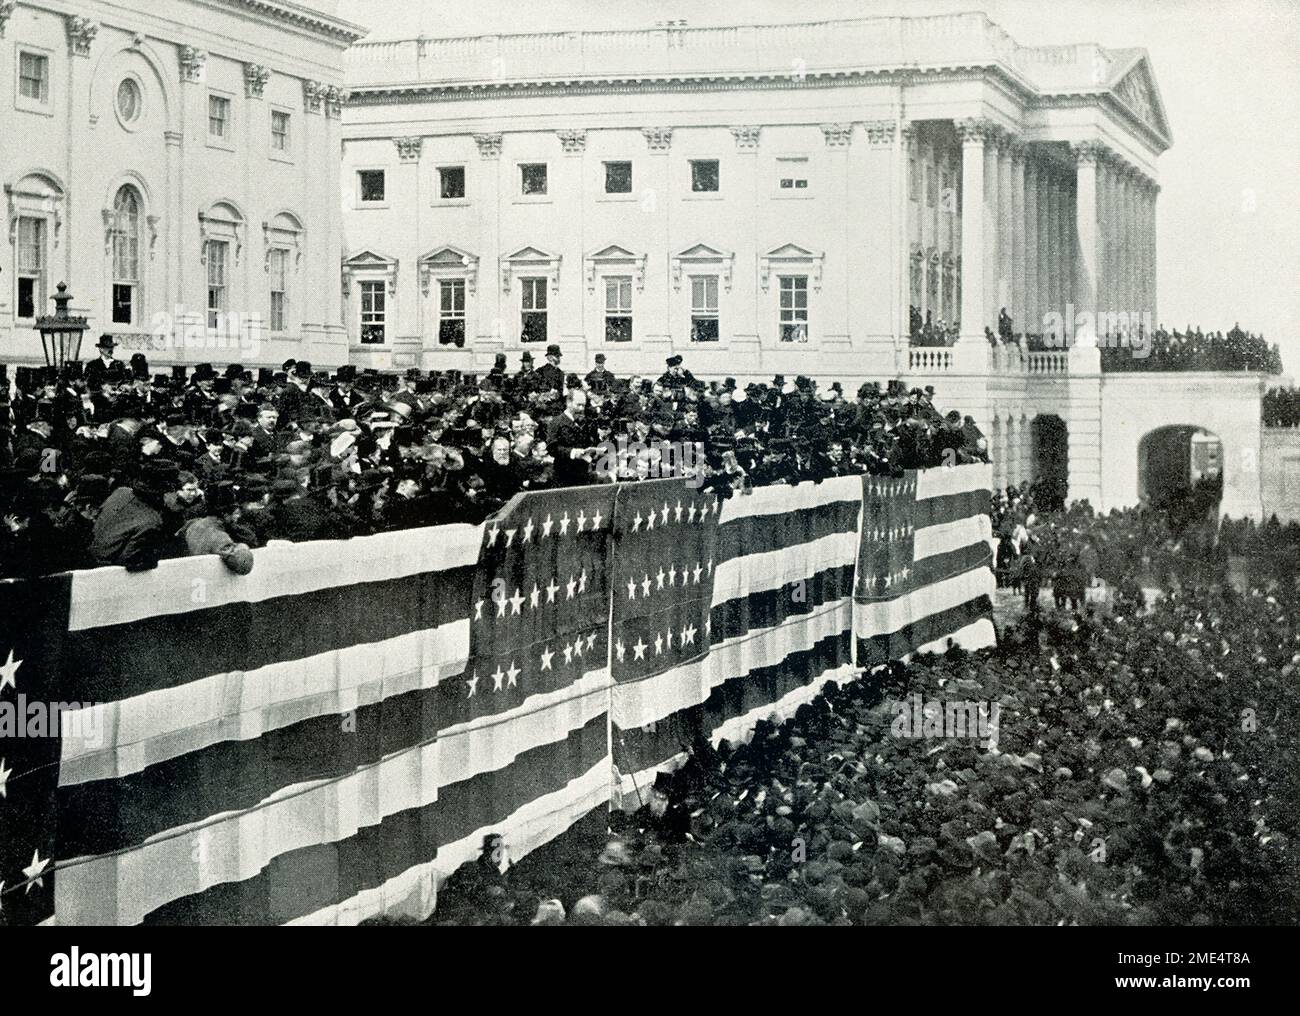 James Abram Garfield (1831-1881) was elected the 20th President of the United States in 1880. His inauguration is shown here. He was constantly harassed by people seeking jobs and was shot by one on July 2, 1881. He died on September 19 Stock Photo